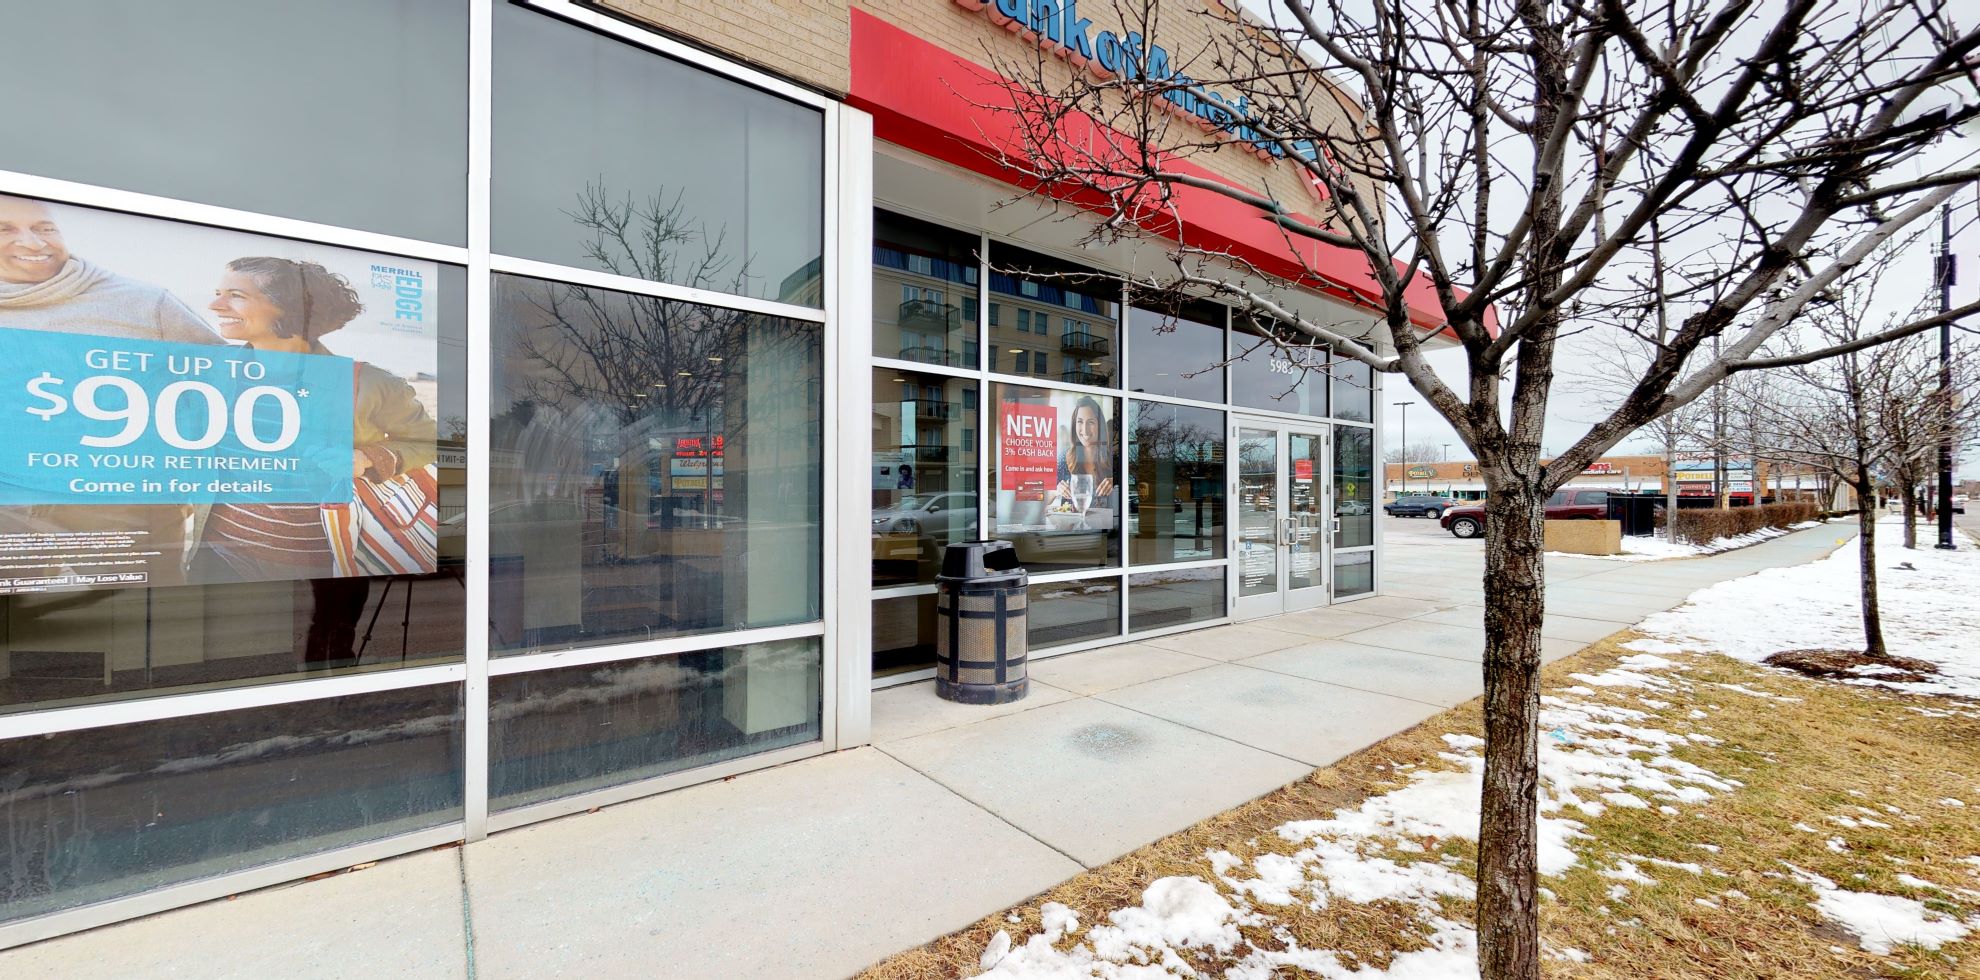 Bank of America financial center with drive-thru ATM | 5983 N Lincoln Ave, Chicago, IL 60659